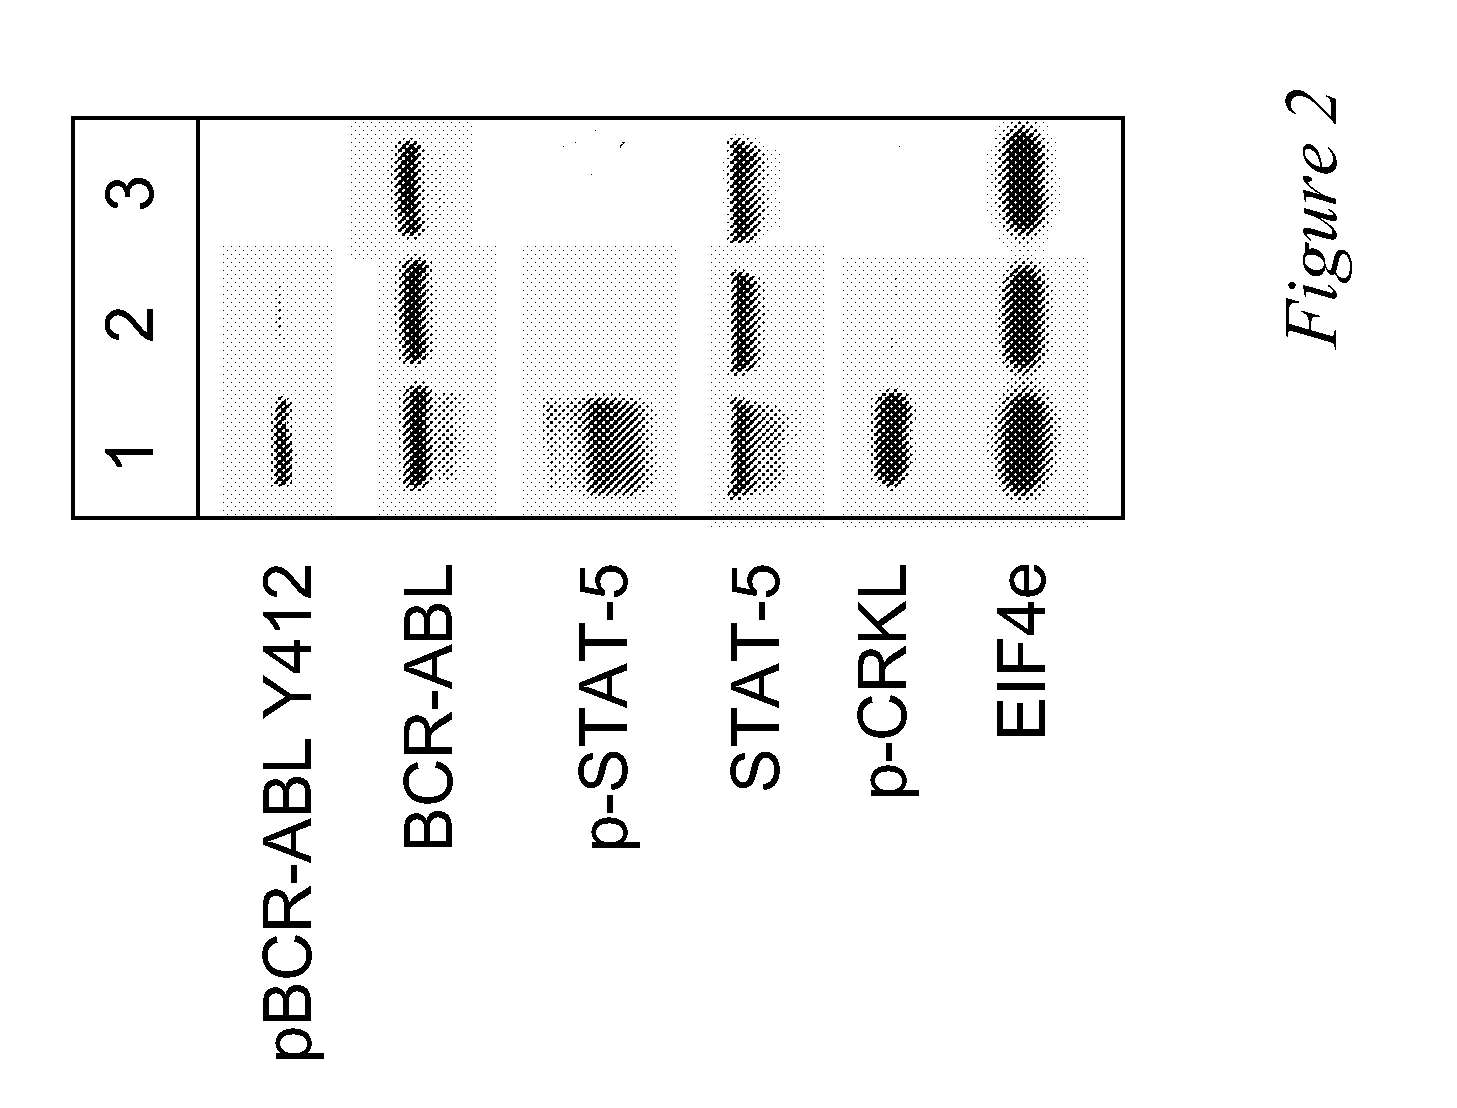 Use of a Kinase Inhibitor for the Treatment of Particular Resistant Tumors